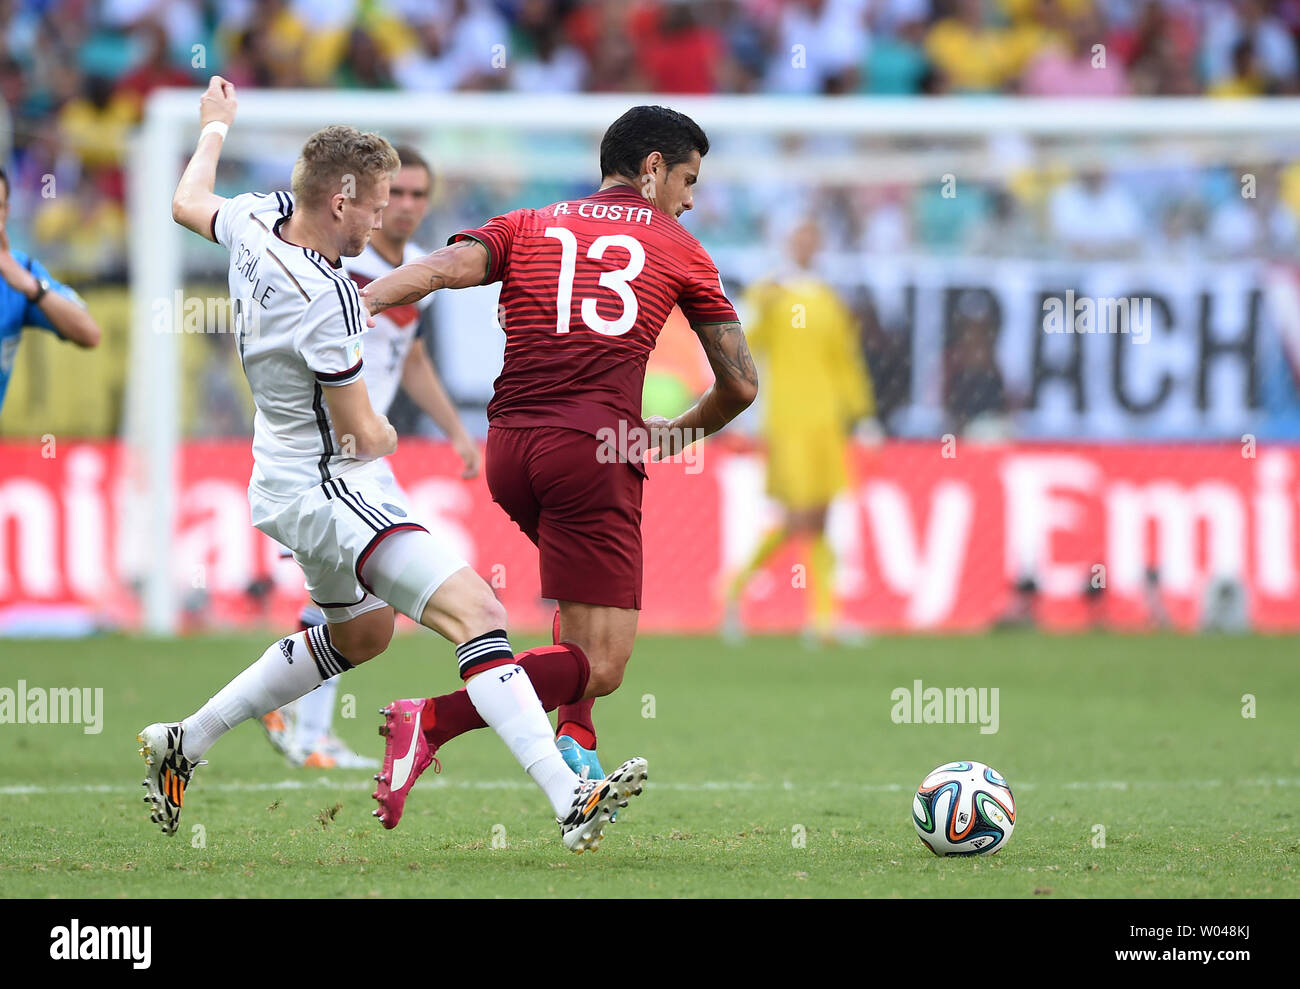 Andre Schurrle of Germany competes with Ricardo Costa of Portugal during the 2014 FIFA World Cup Group G match at the Arena Fonte Nova in Salvador, Brazil on June 16, 2014. UPI/Chris Brunskill Stock Photo